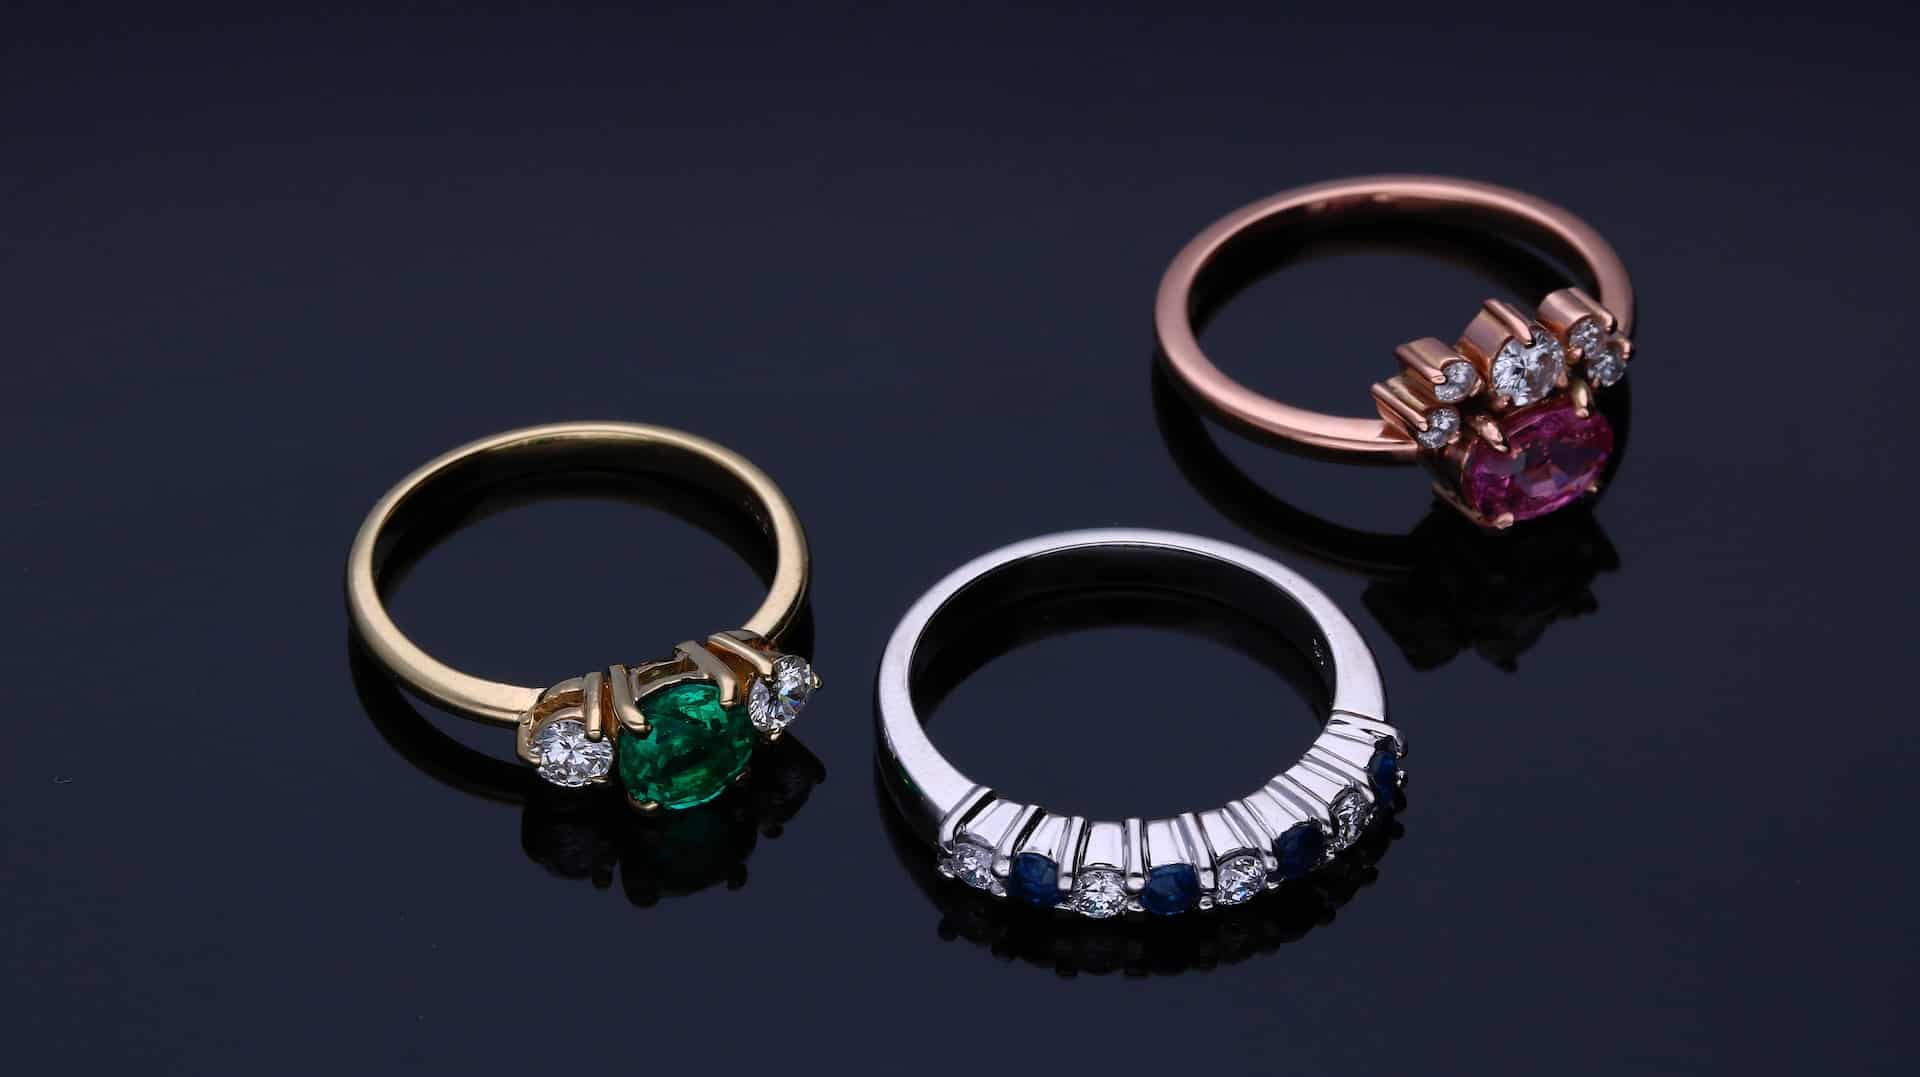 Silver, gold, and rose gold rings